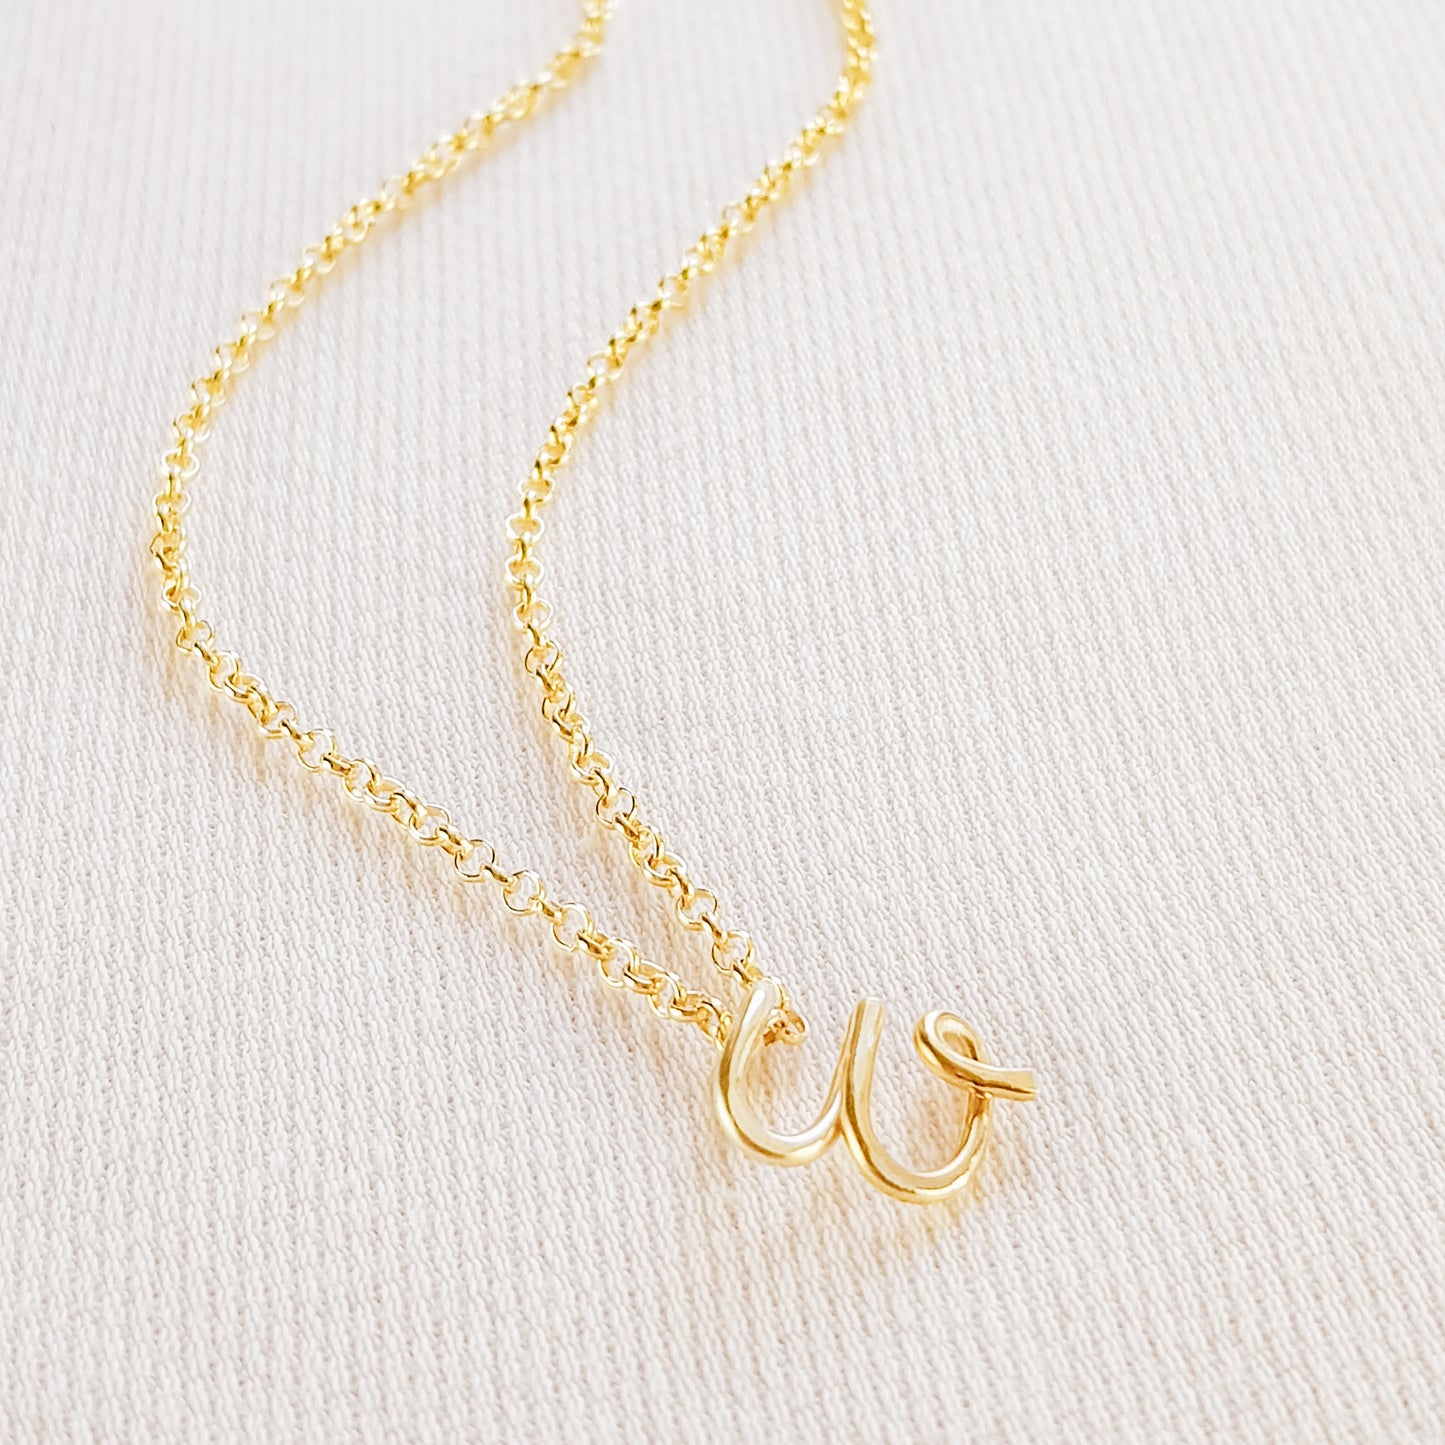 K Initial Necklace • Personalized Name Necklace • Letter Necklace • Gold Necklace • Wife Gifts • Gifts For Mom • Moms Gift • Birthday Gift